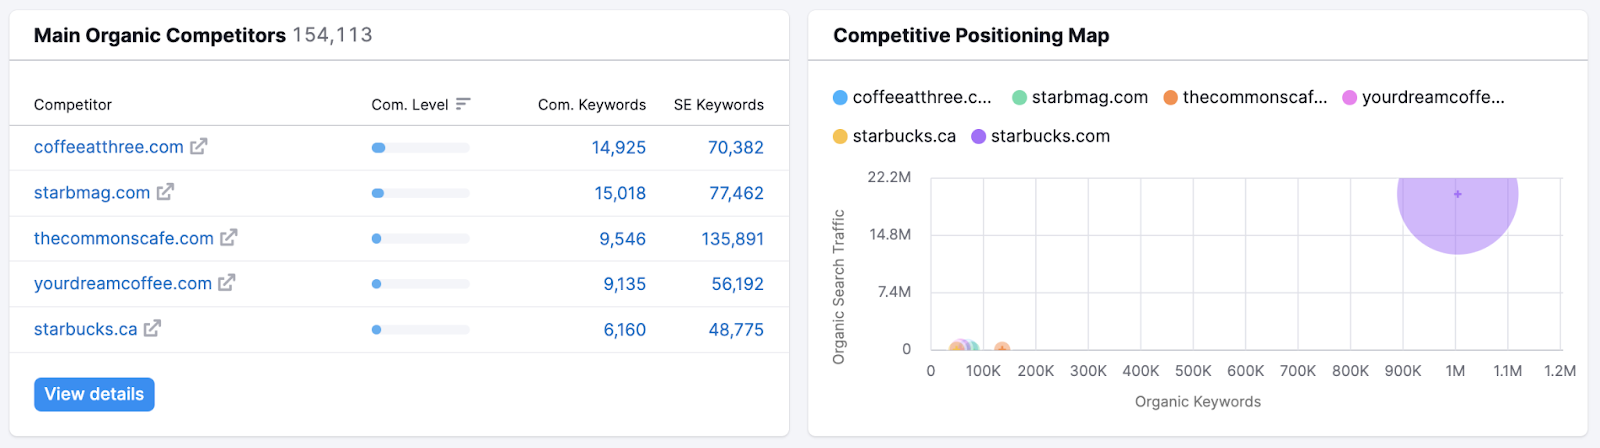 "Main Organic Competitors" and "Competitive Positioning Map" sections in Domain Overview